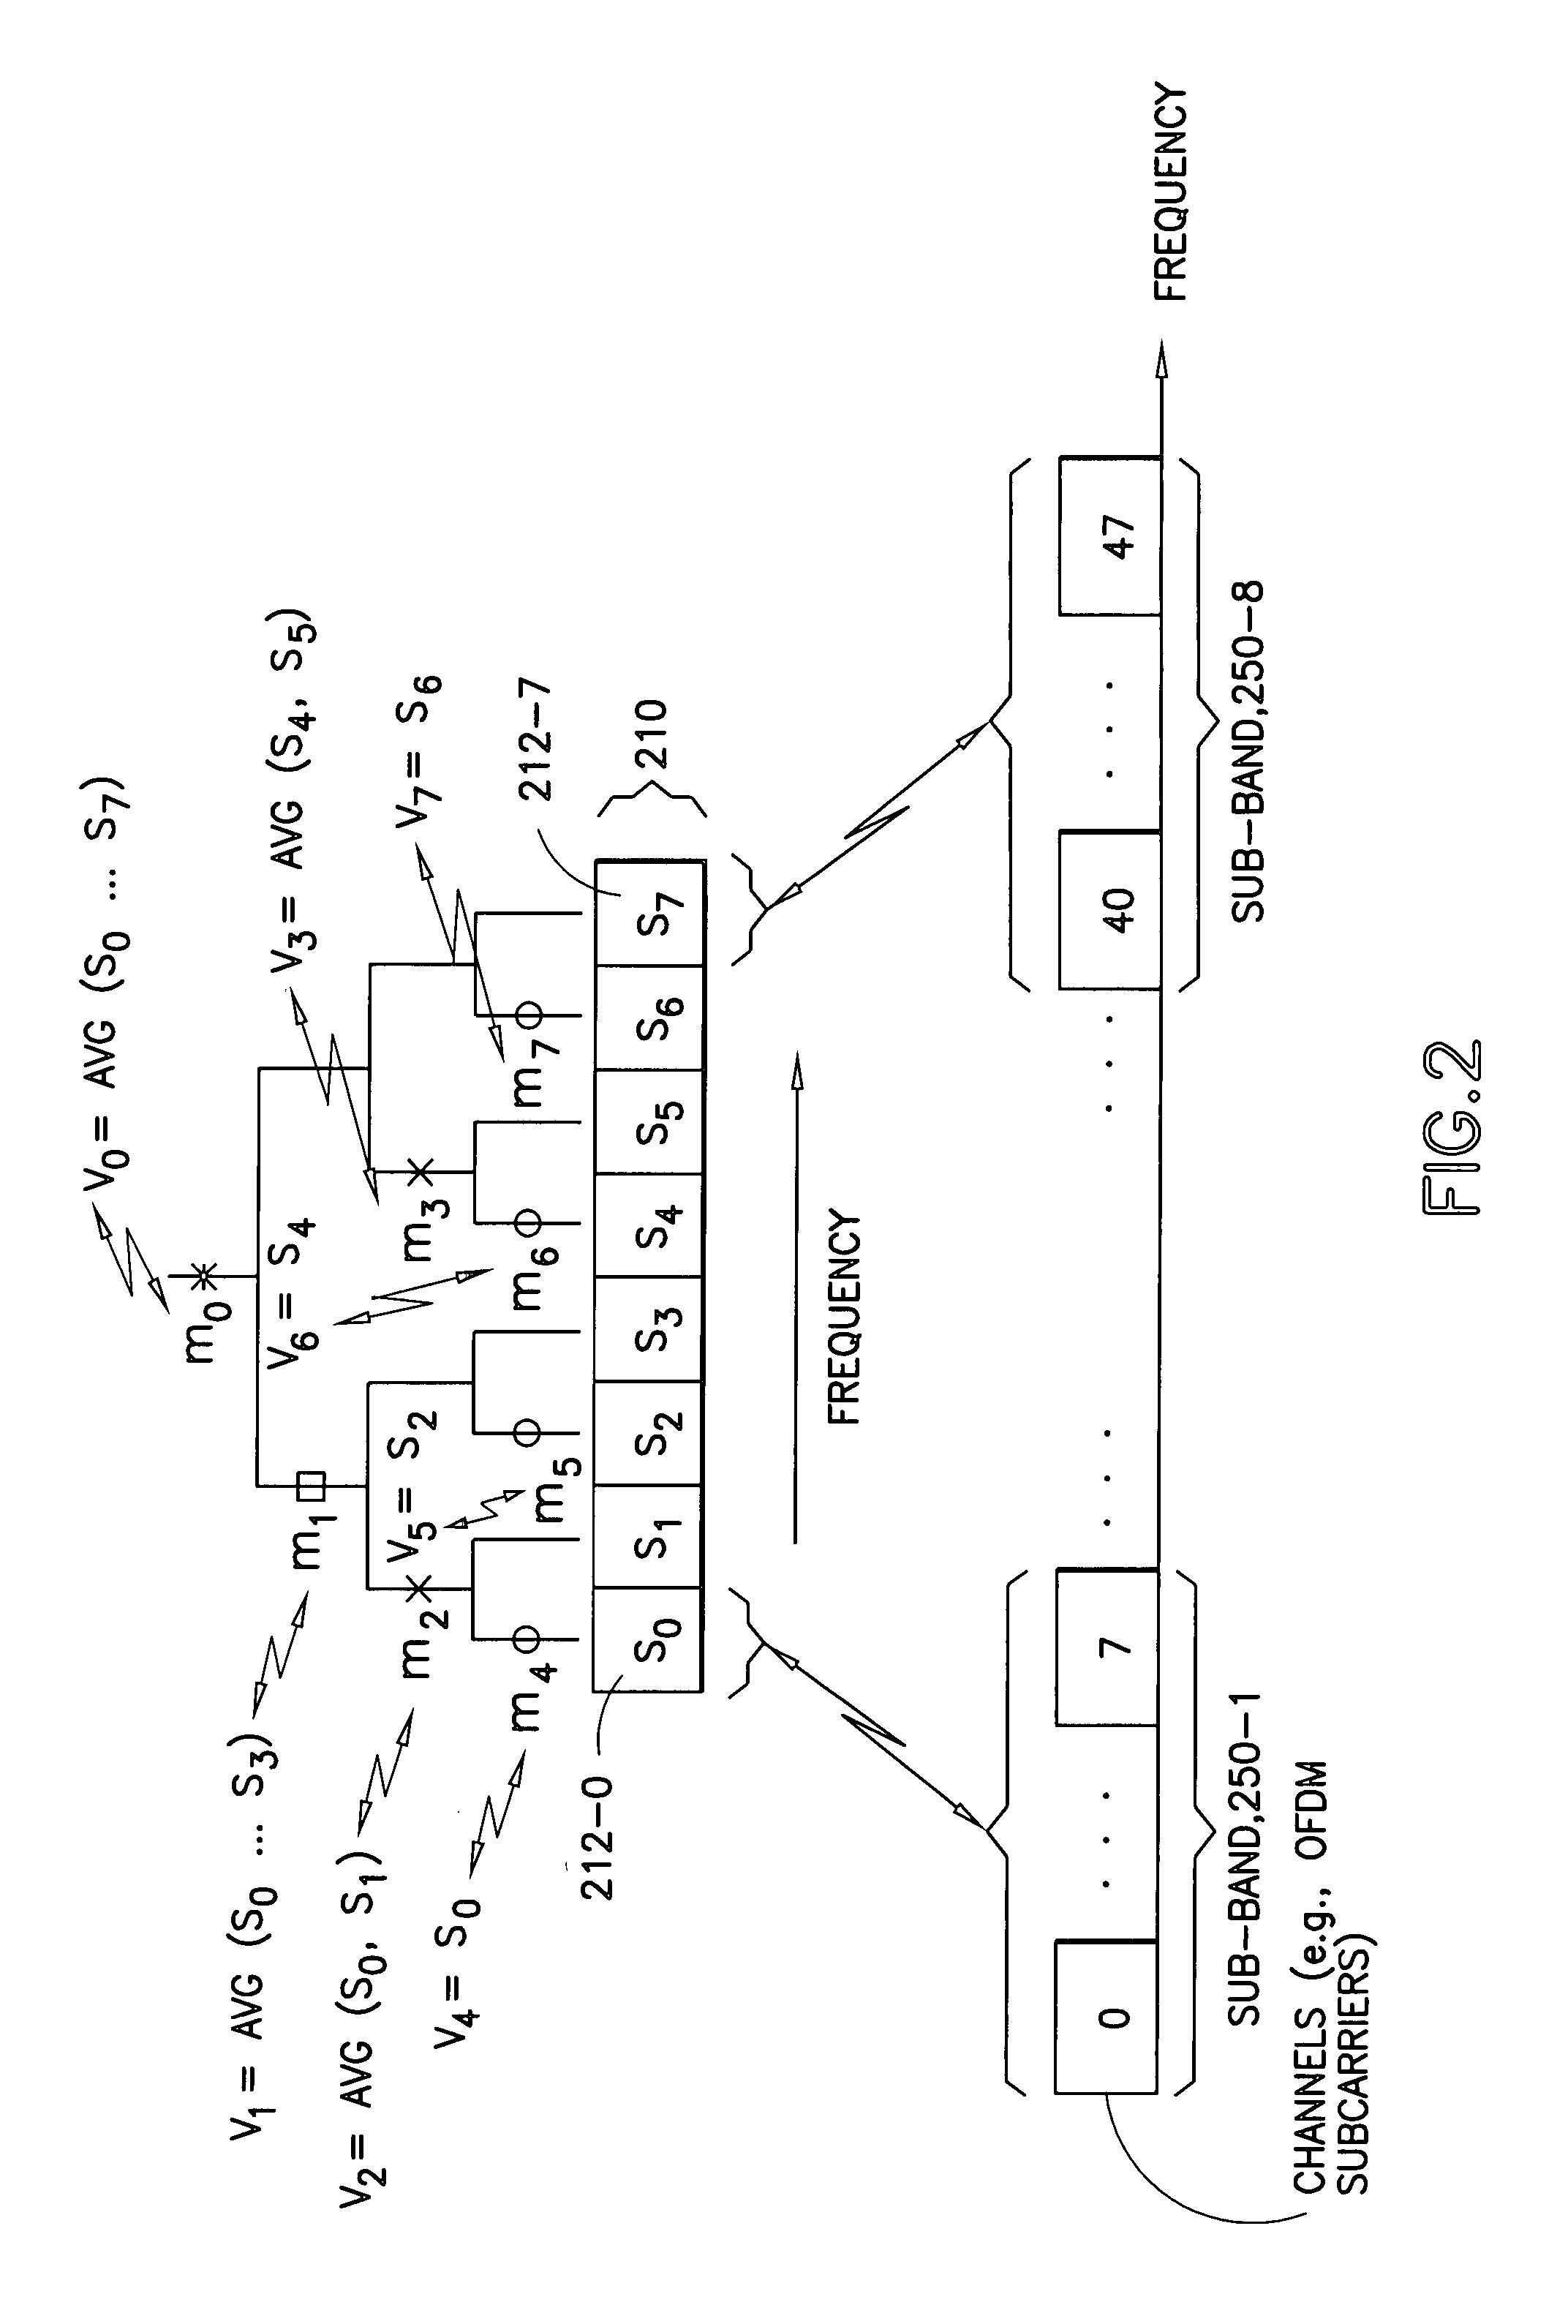 Apparatus, methods and computer program products providing signaling of time staggered measurement reports and scheduling in response thereto